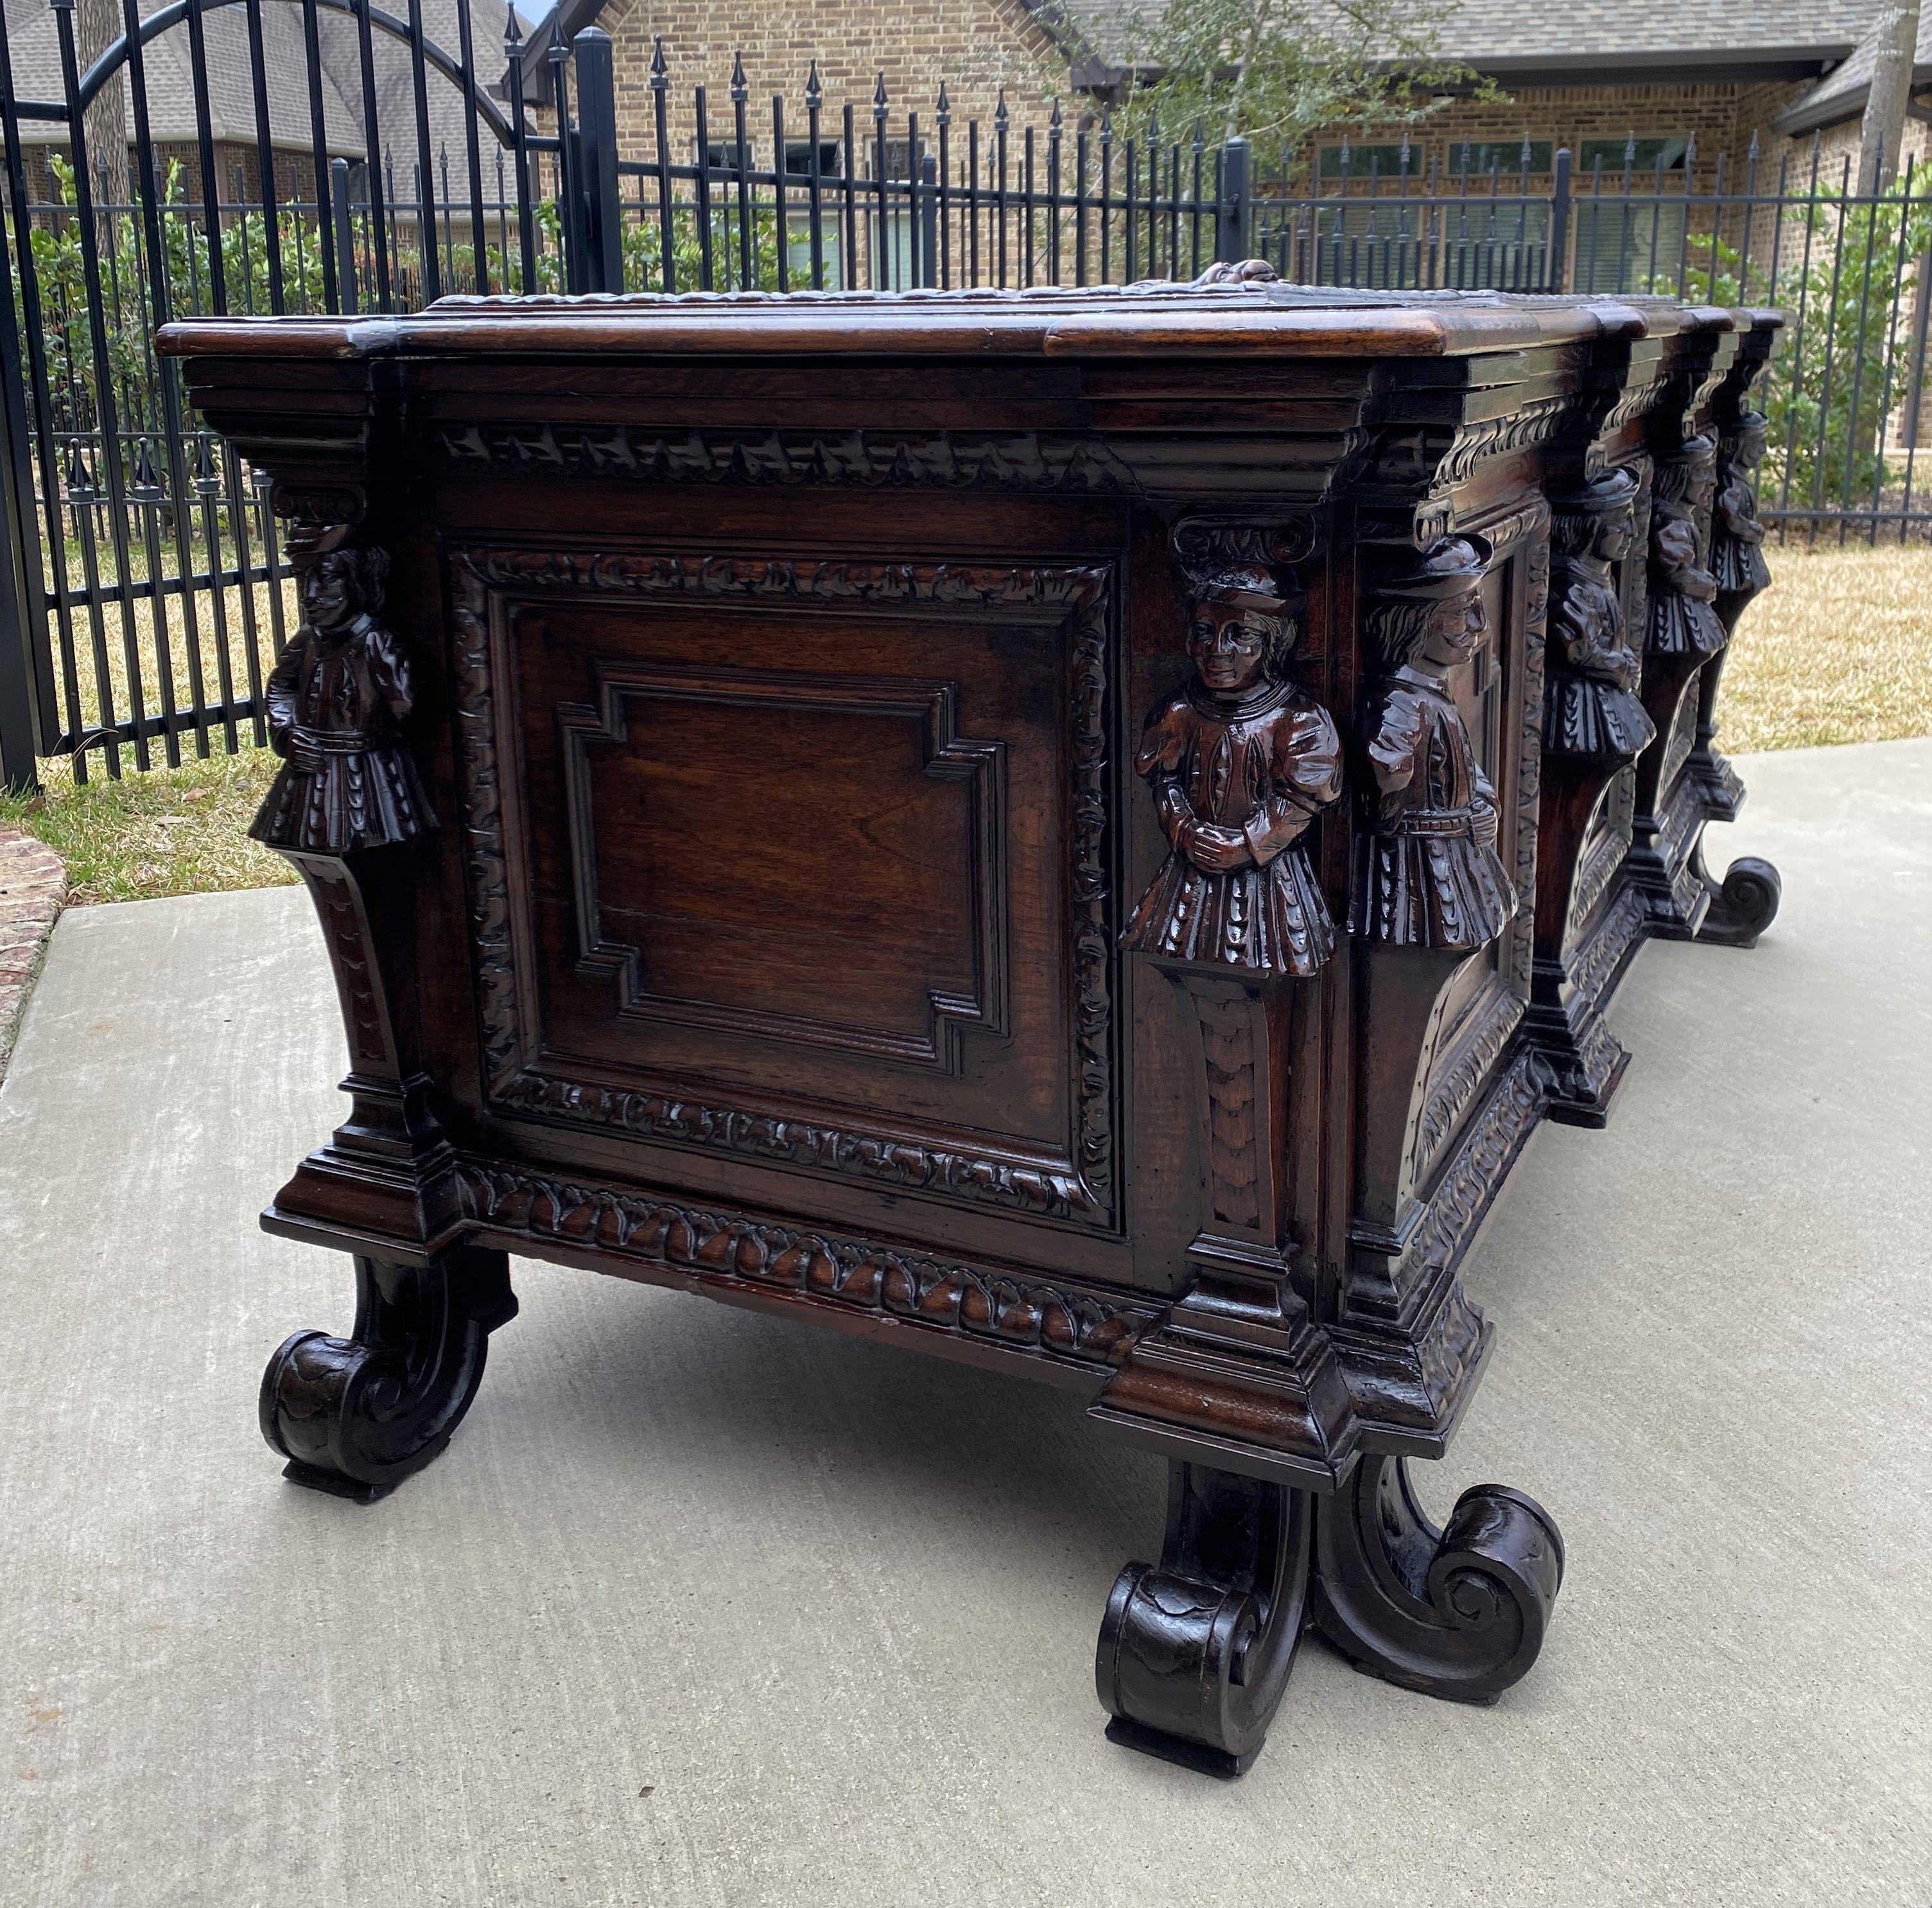 Gothic Revival Antique French Trunk Blanket Box Coffer Chest Oak Storage Large Lions 18th C.